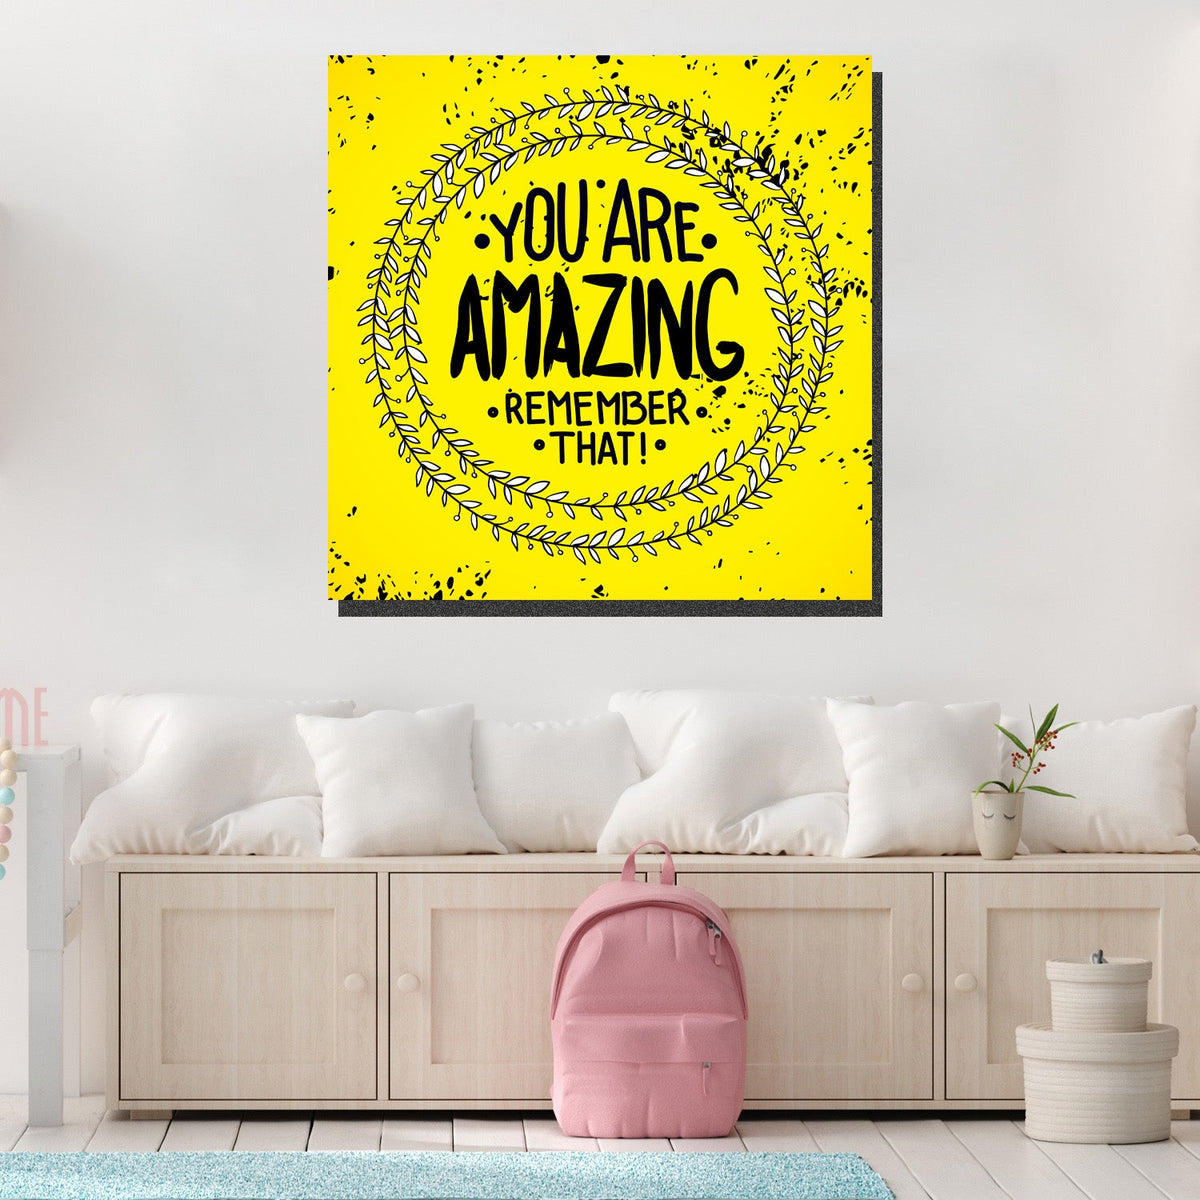 https://cdn.shopify.com/s/files/1/0387/9986/8044/products/YouAreAmazingCanvasArtprintStretched-1.jpg